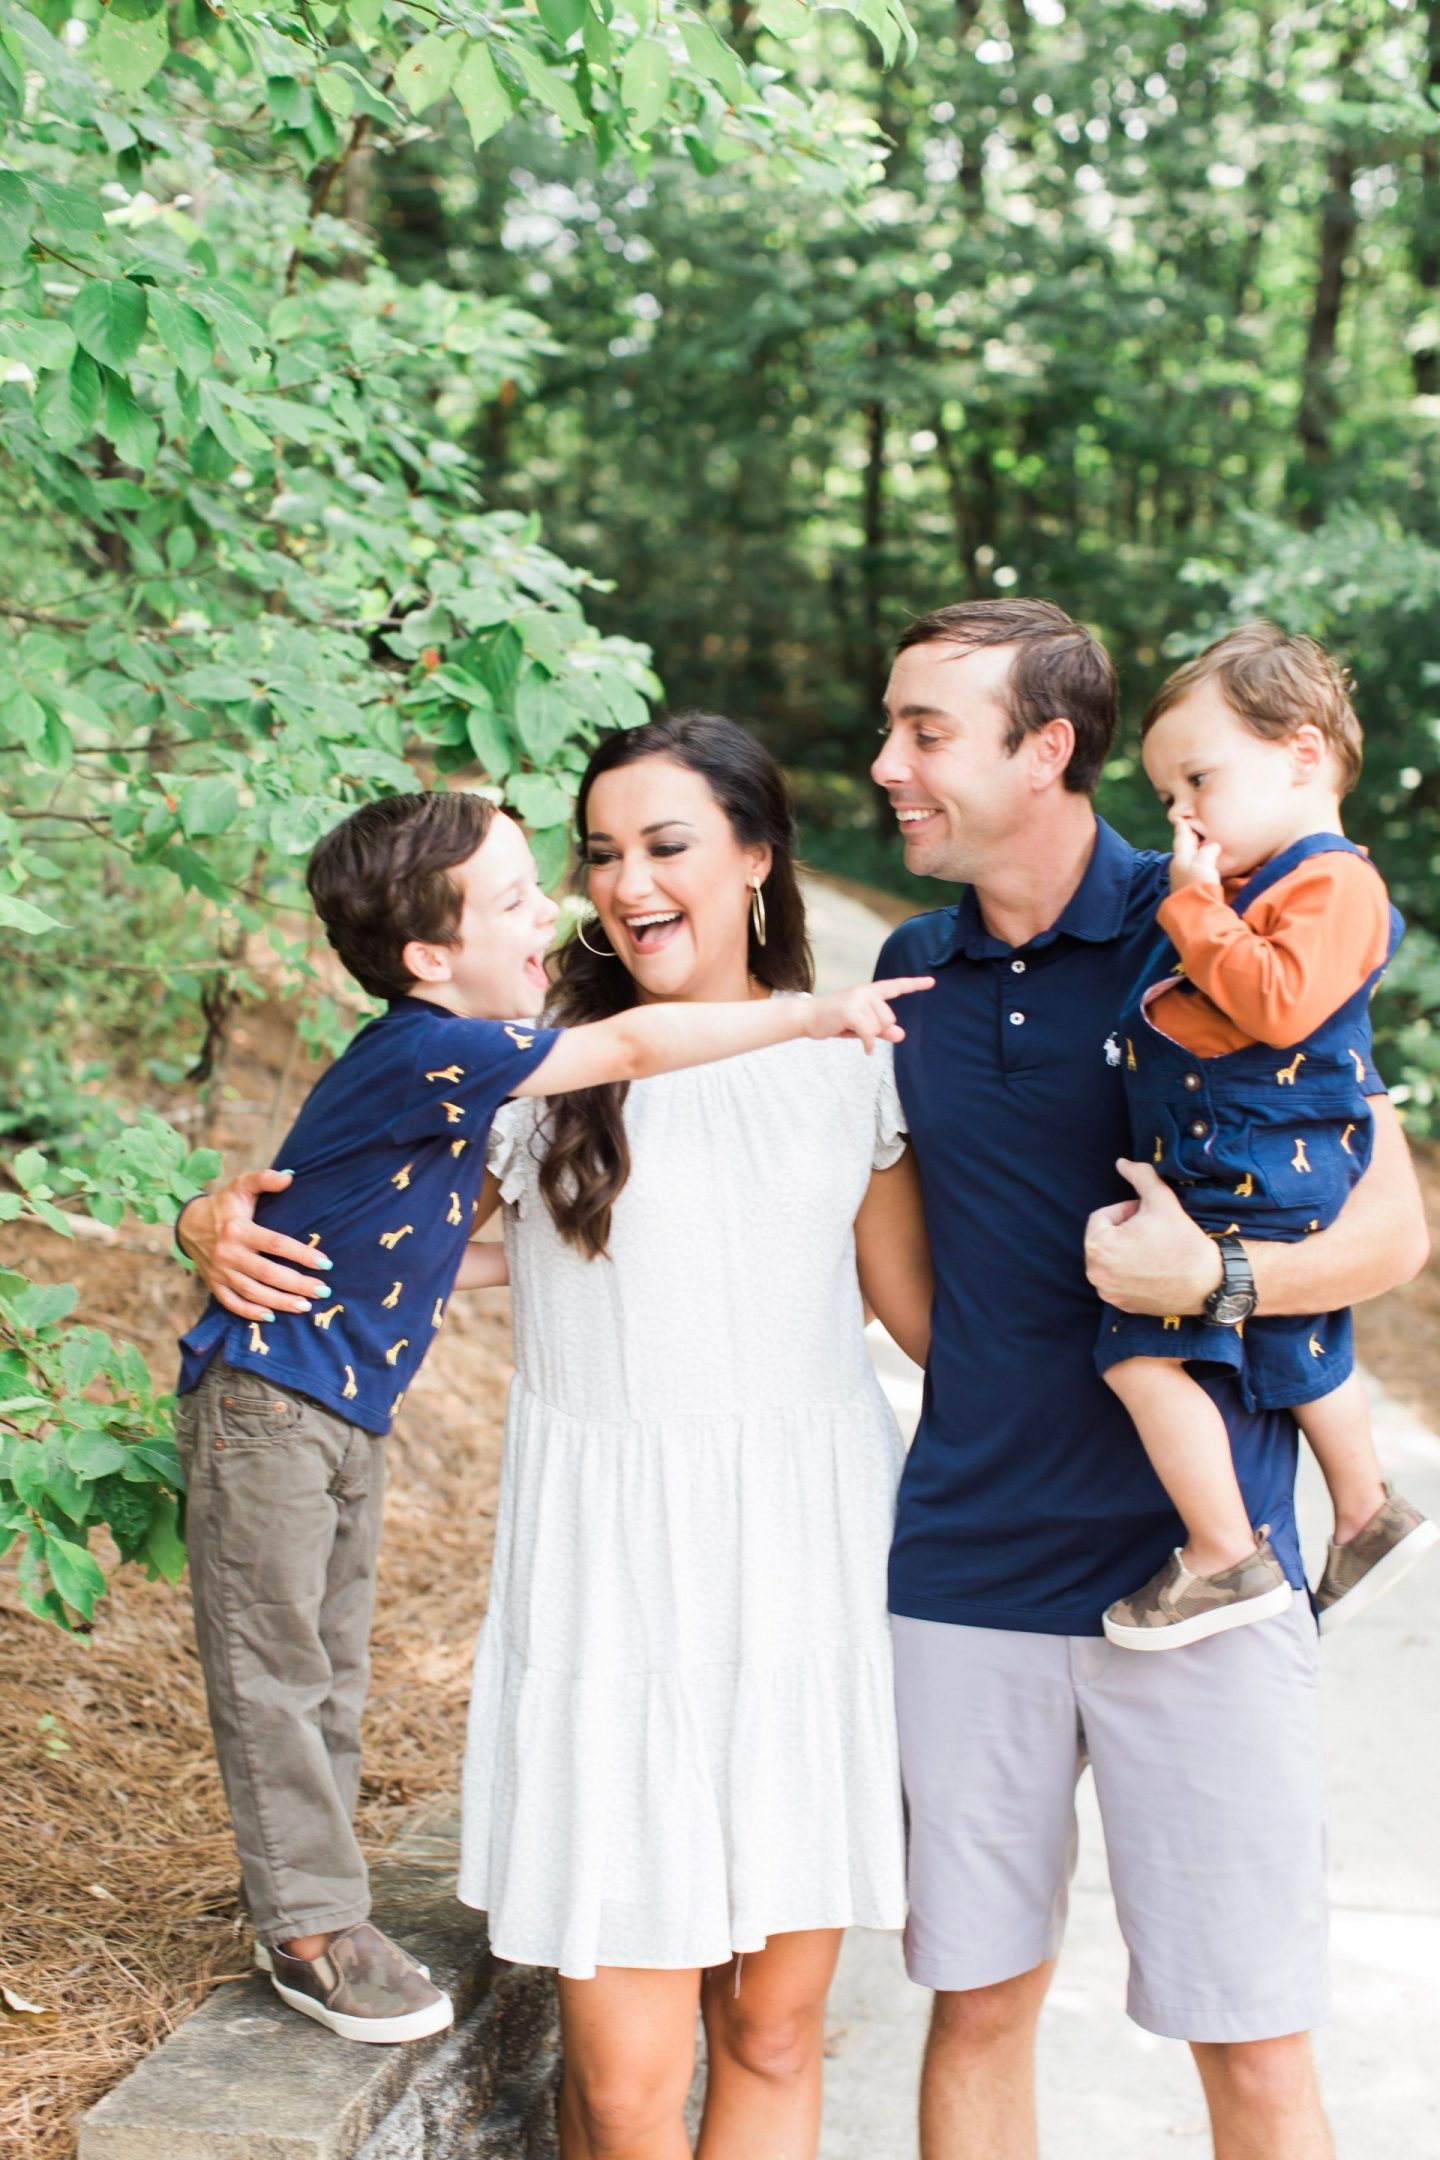 Fall Family Photo Outfit Ideas For Your Entire Family by Alabama Family + Lifestyle blogger, Heather Brown // My Life Well Loved